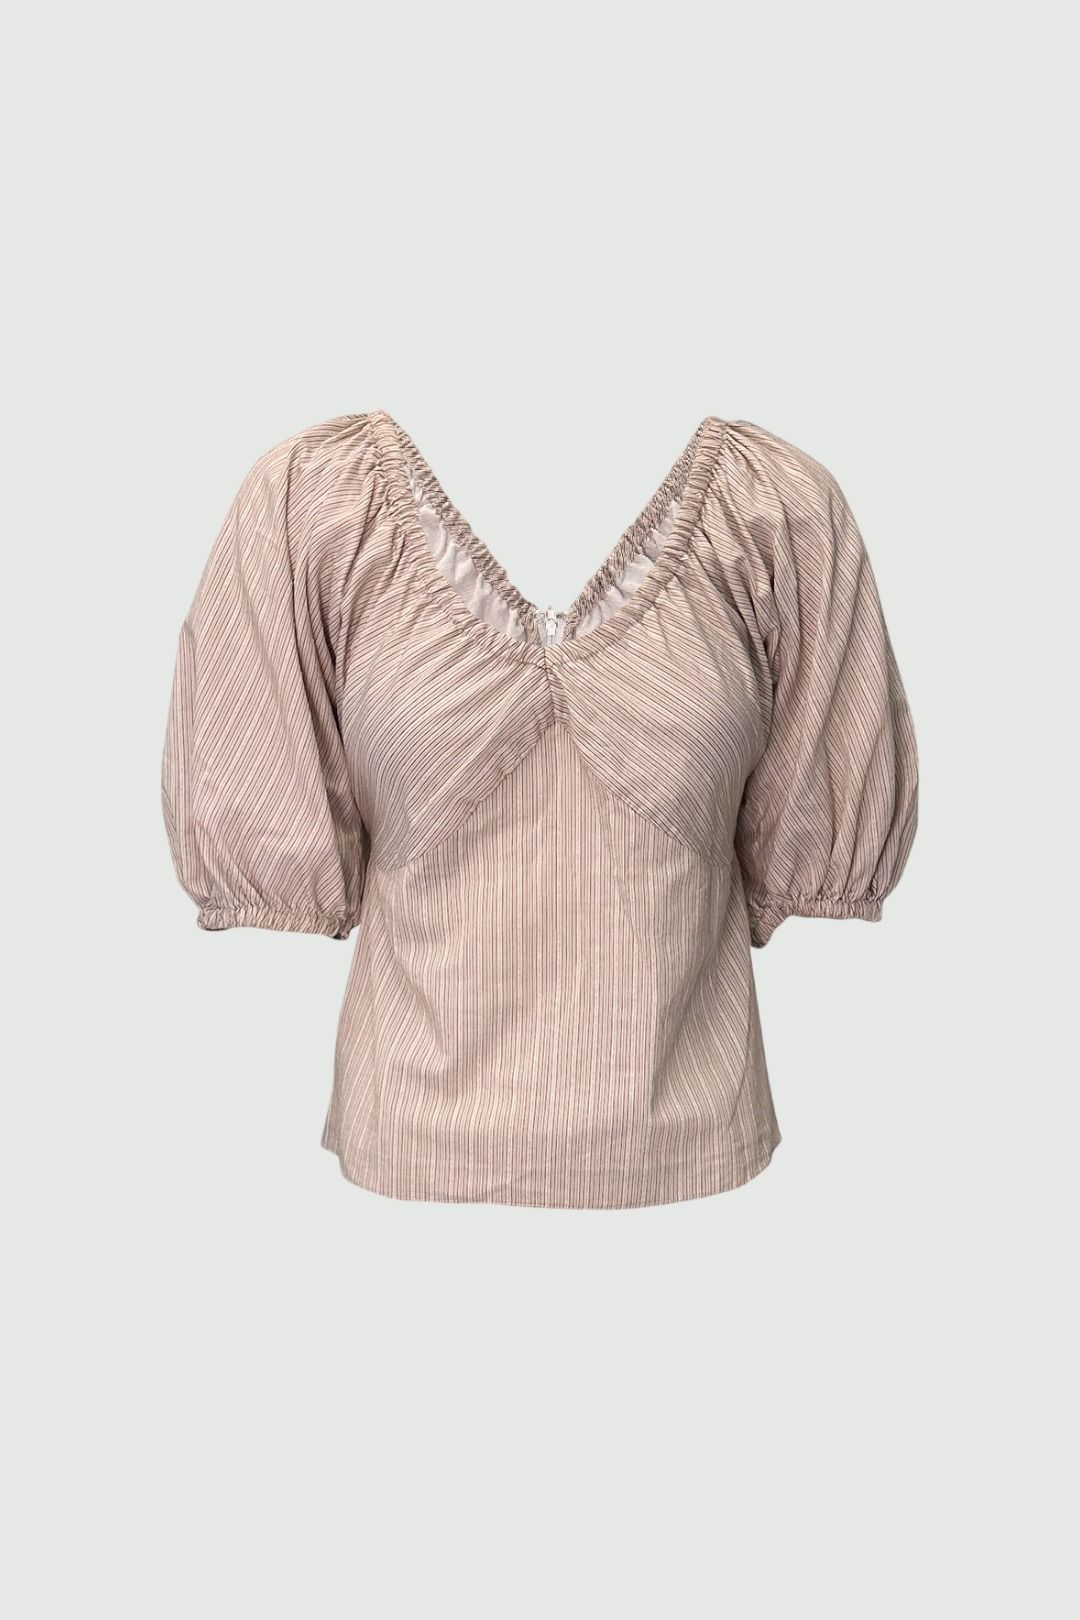 Scanlan Theodore Striped Puff Sleeve Blouse in Nude